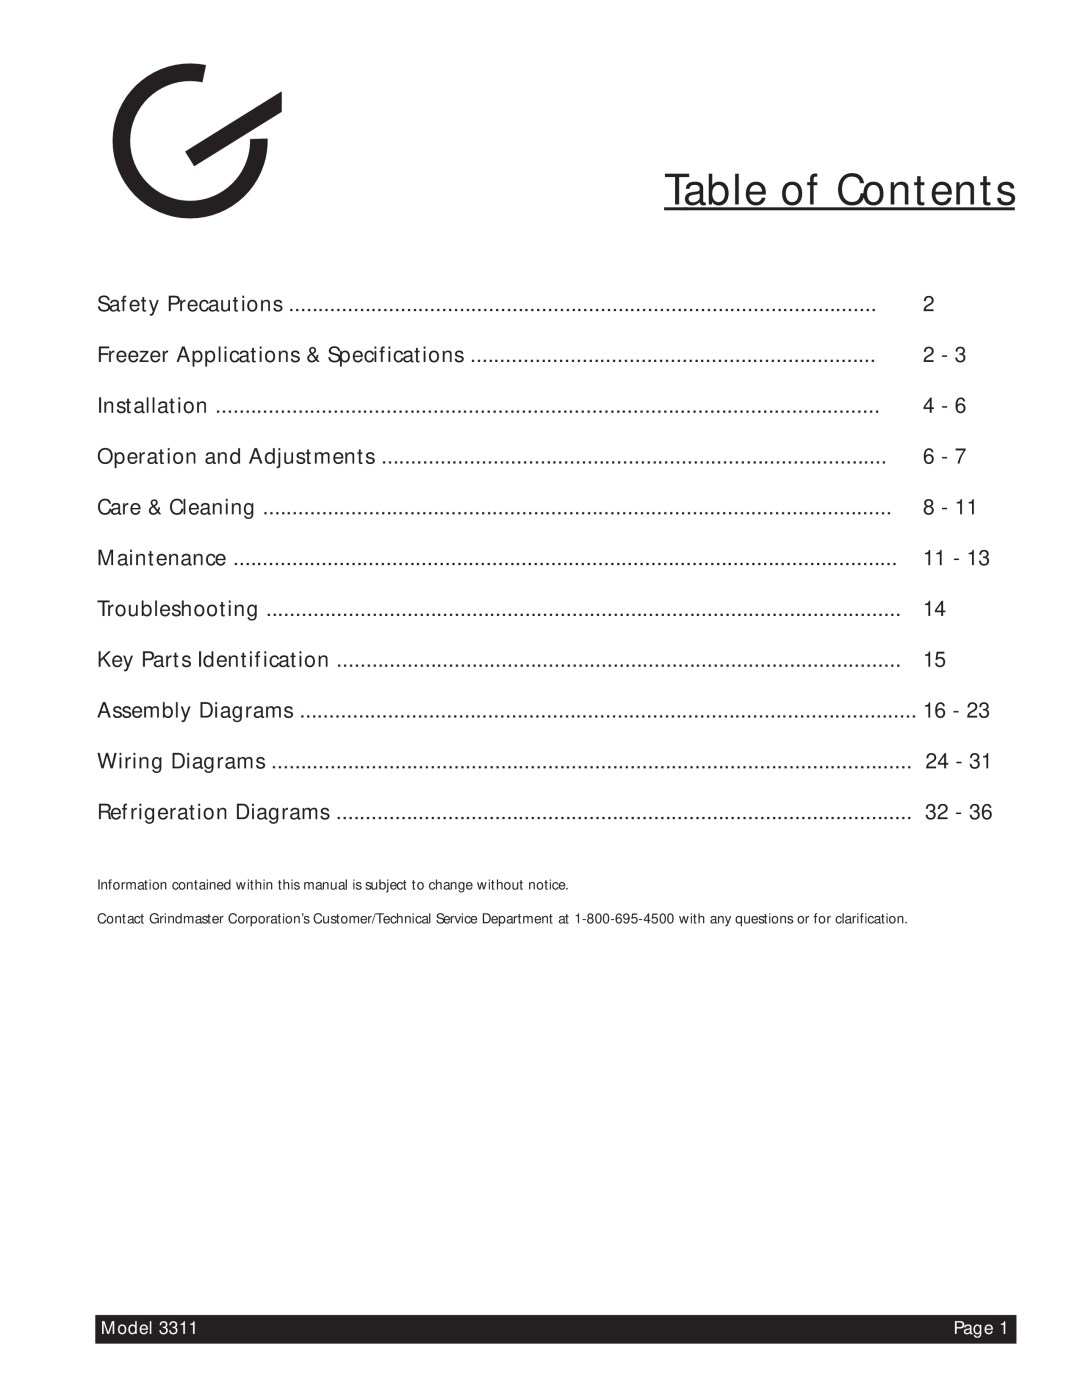 Beverage-Air 3311 manual Table of Contents 